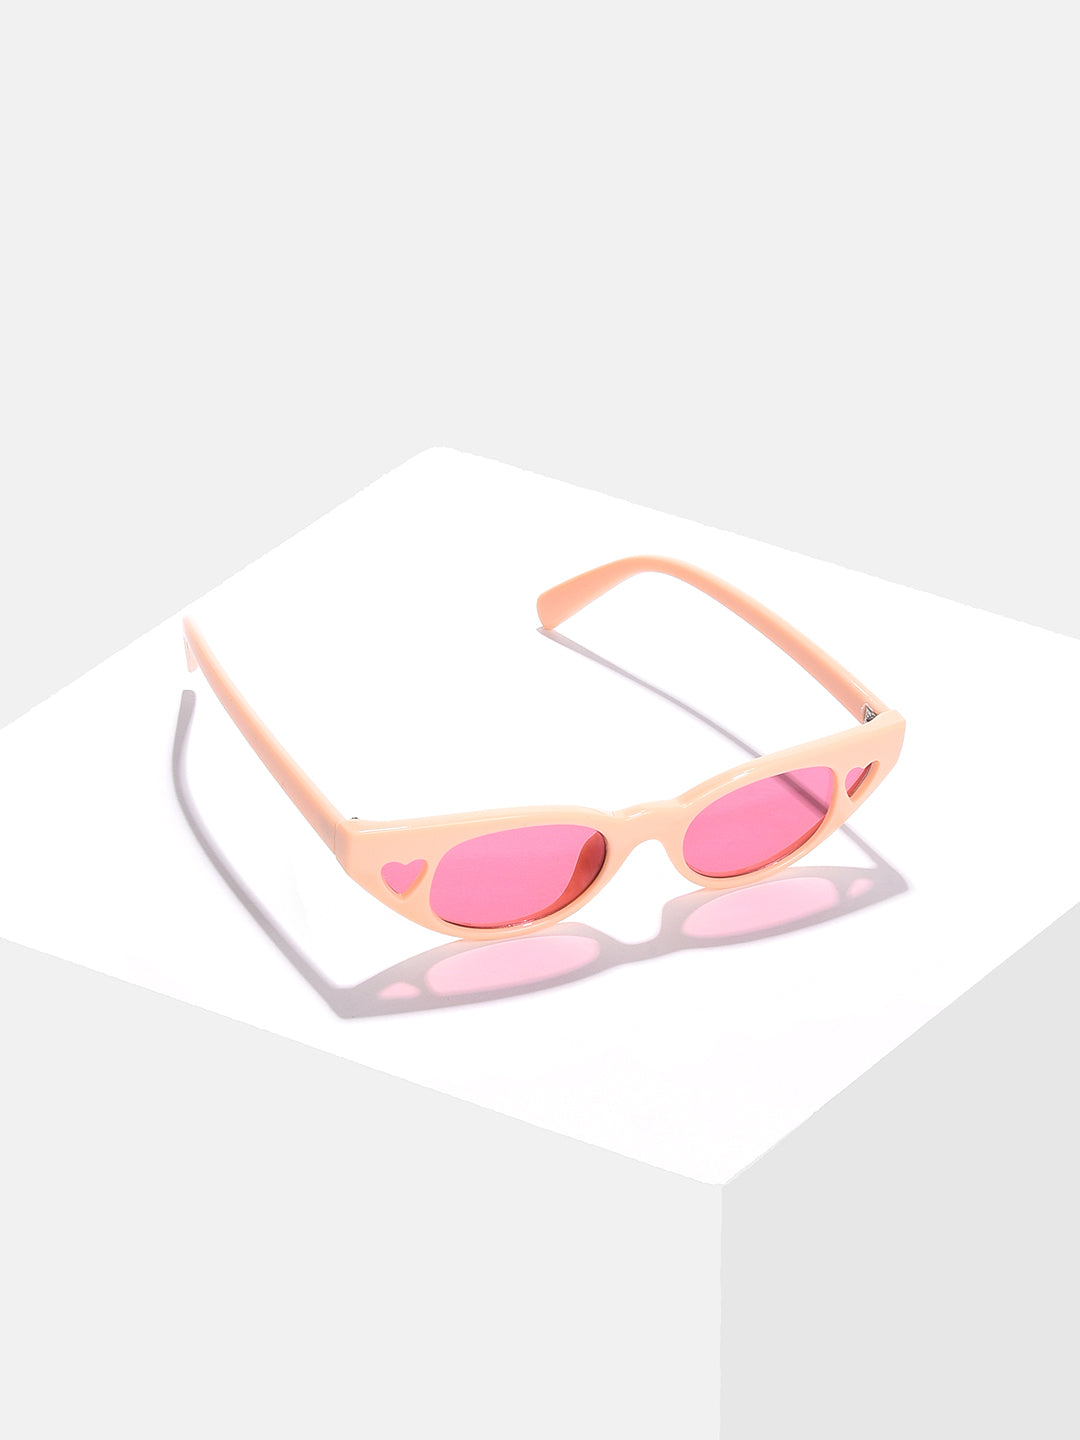 Pink Lens Red Cateye Sunglasses